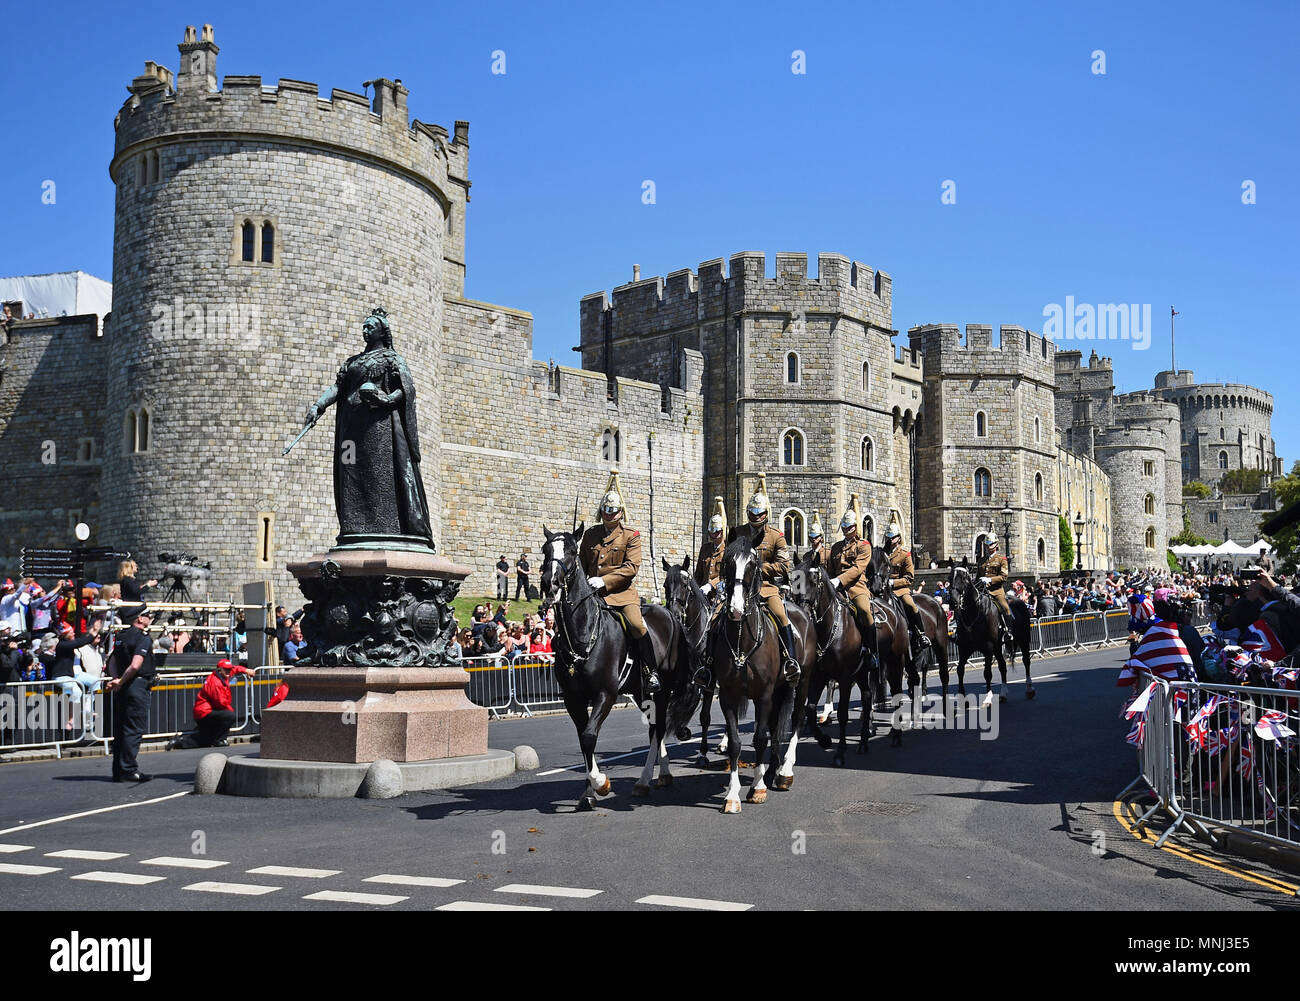 Members of the armed forces during a parade rehearsal in Windsor, Berkshire ahead of the wedding of Prince Harry and Meghan Markle this weekend. Stock Photo